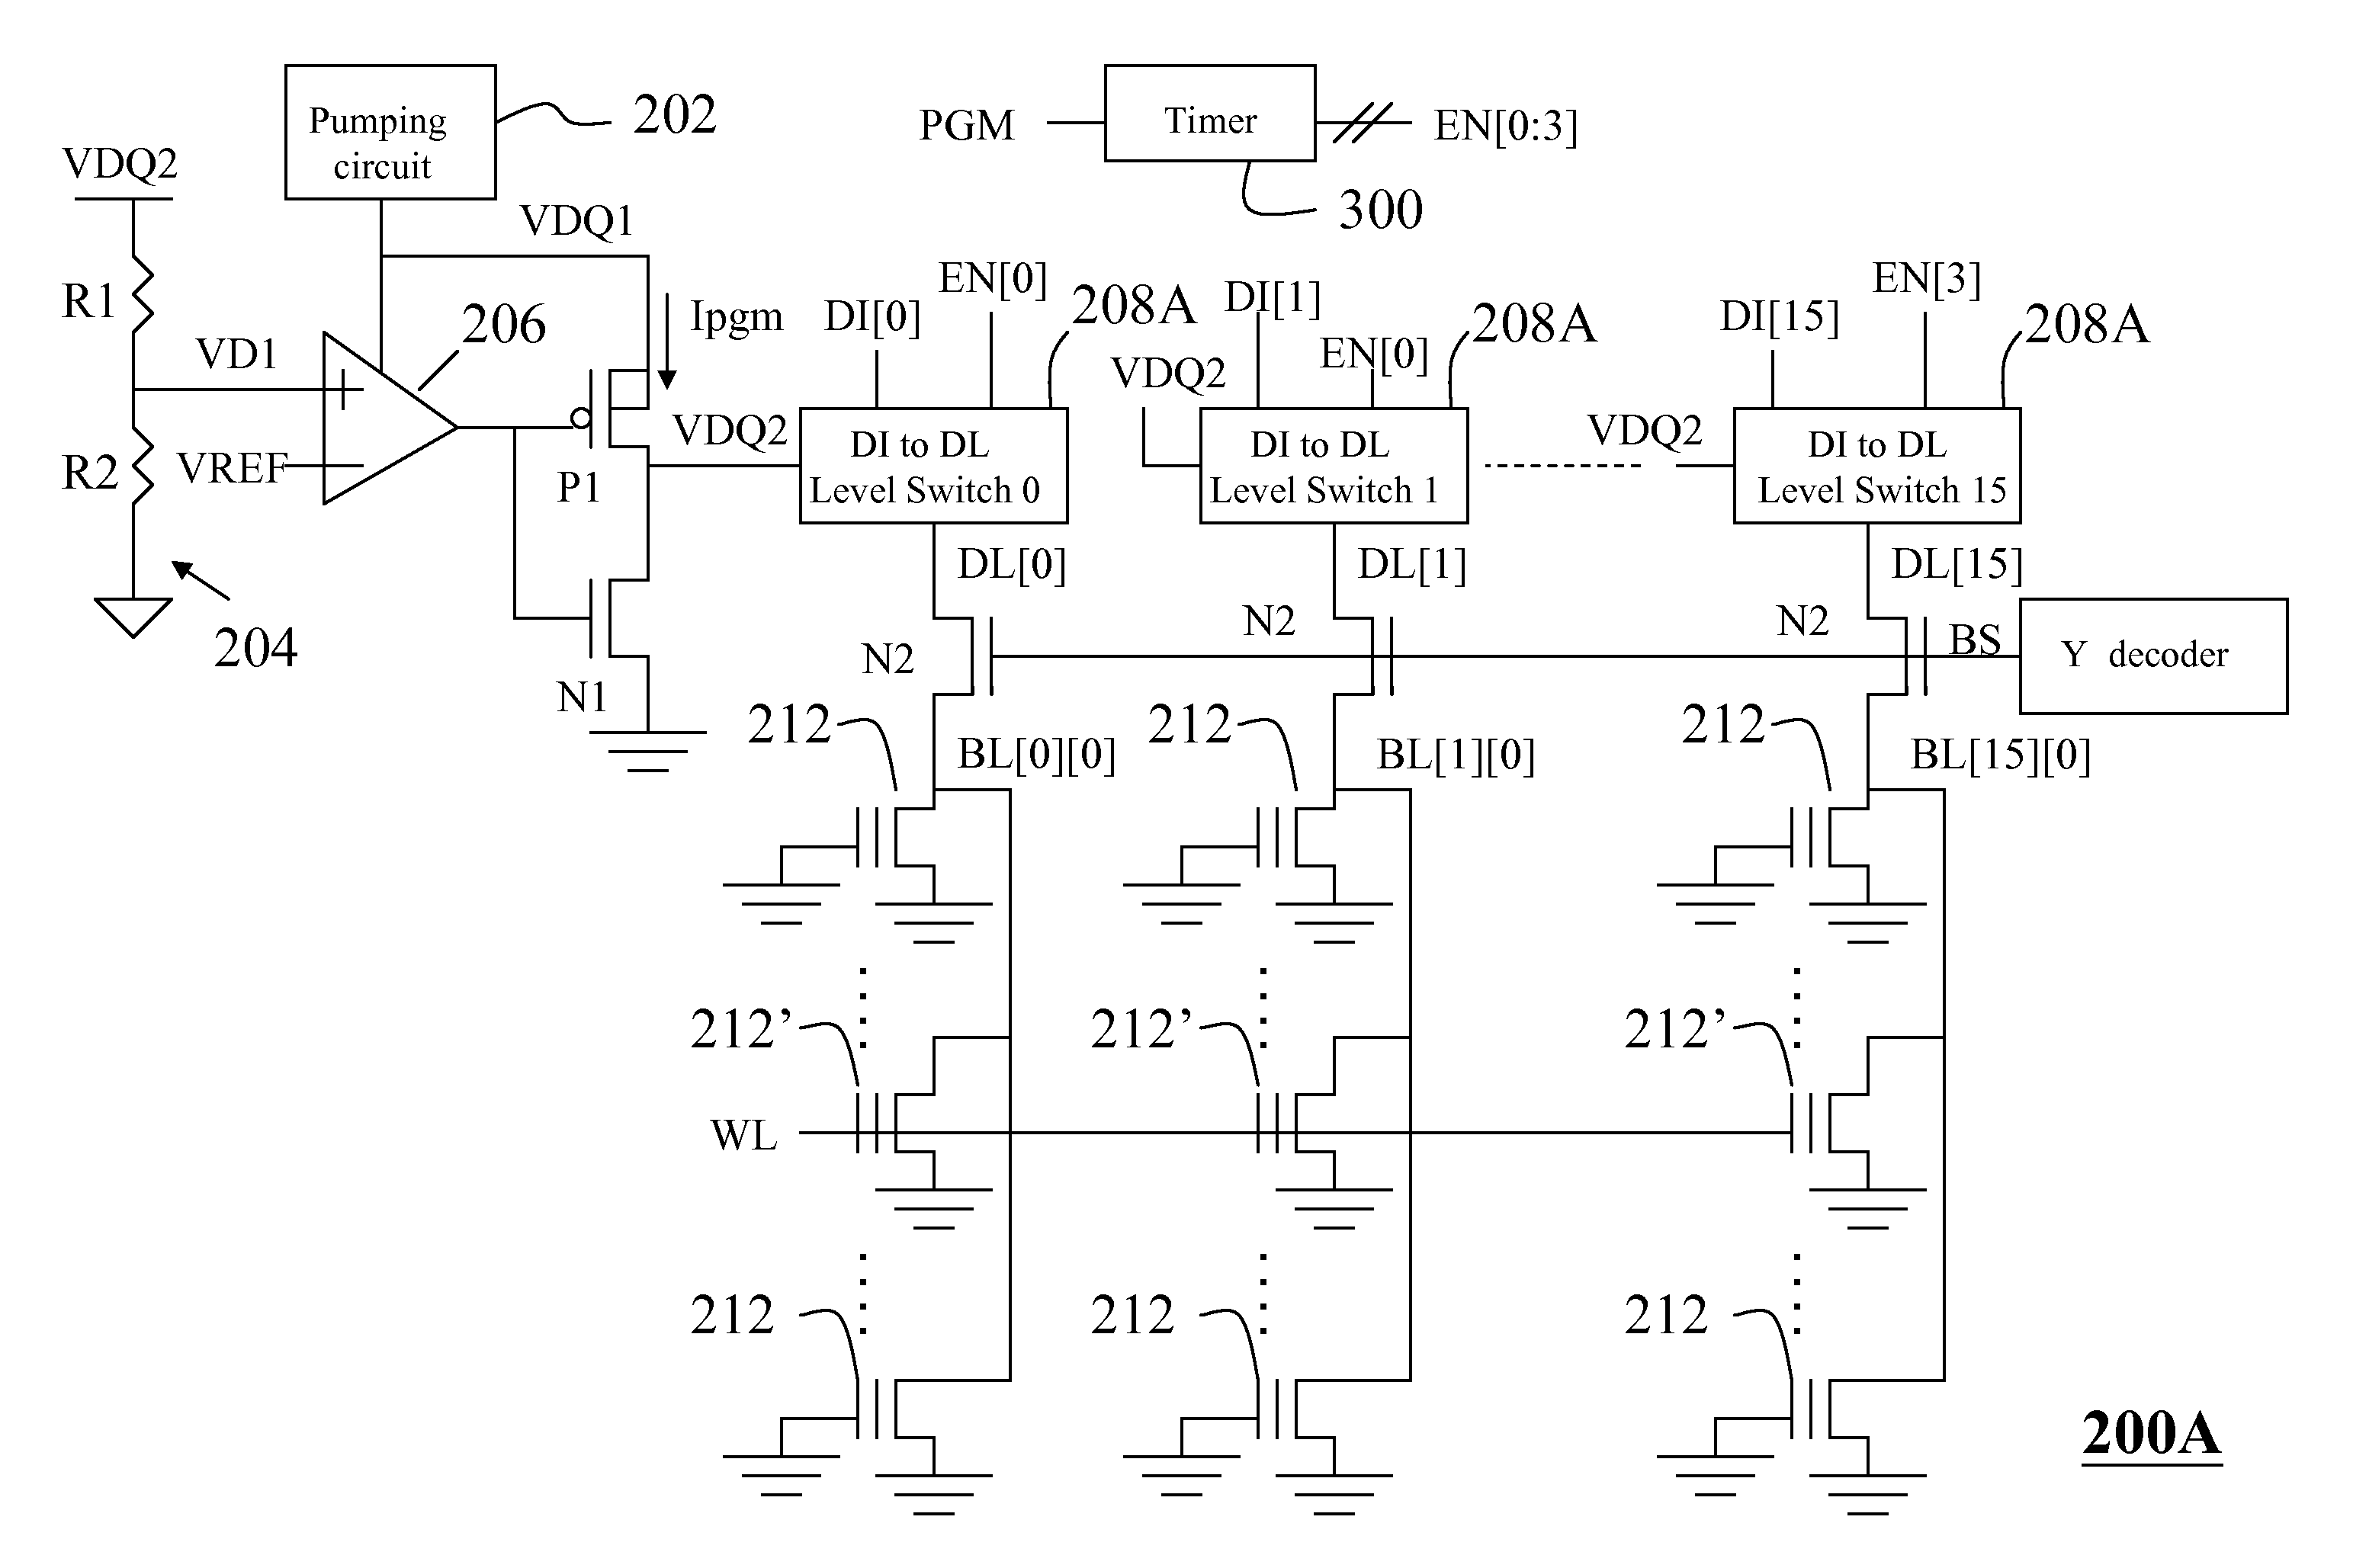 Flash memory with sequential programming